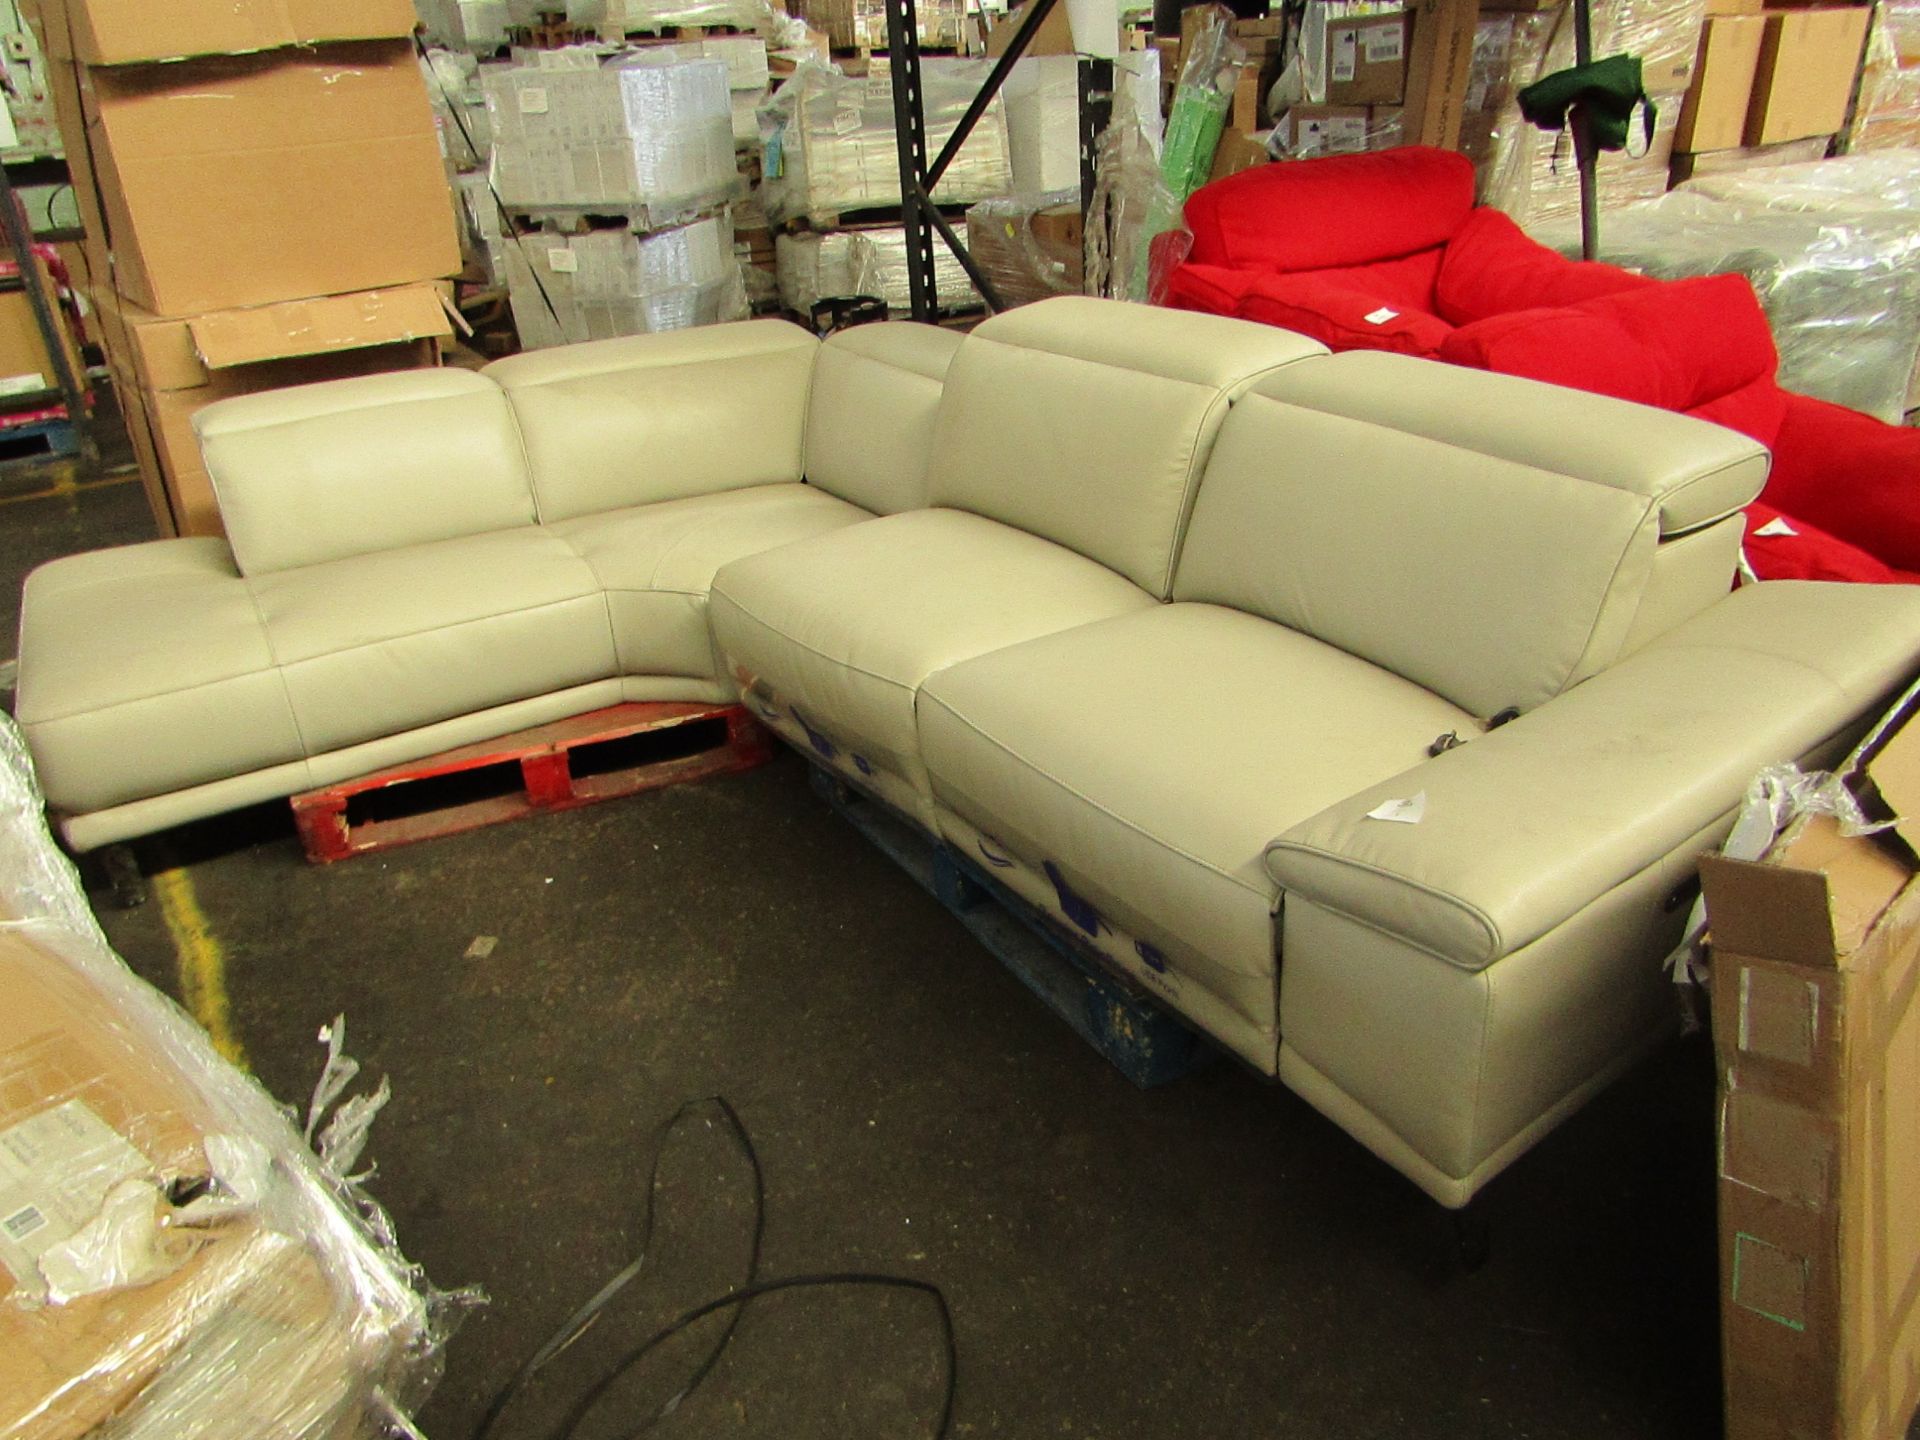 1x Gilman Creek 5 Seater Power Recliner Sofa with USB Charging Points - Cream Leather - Tested - Image 2 of 2